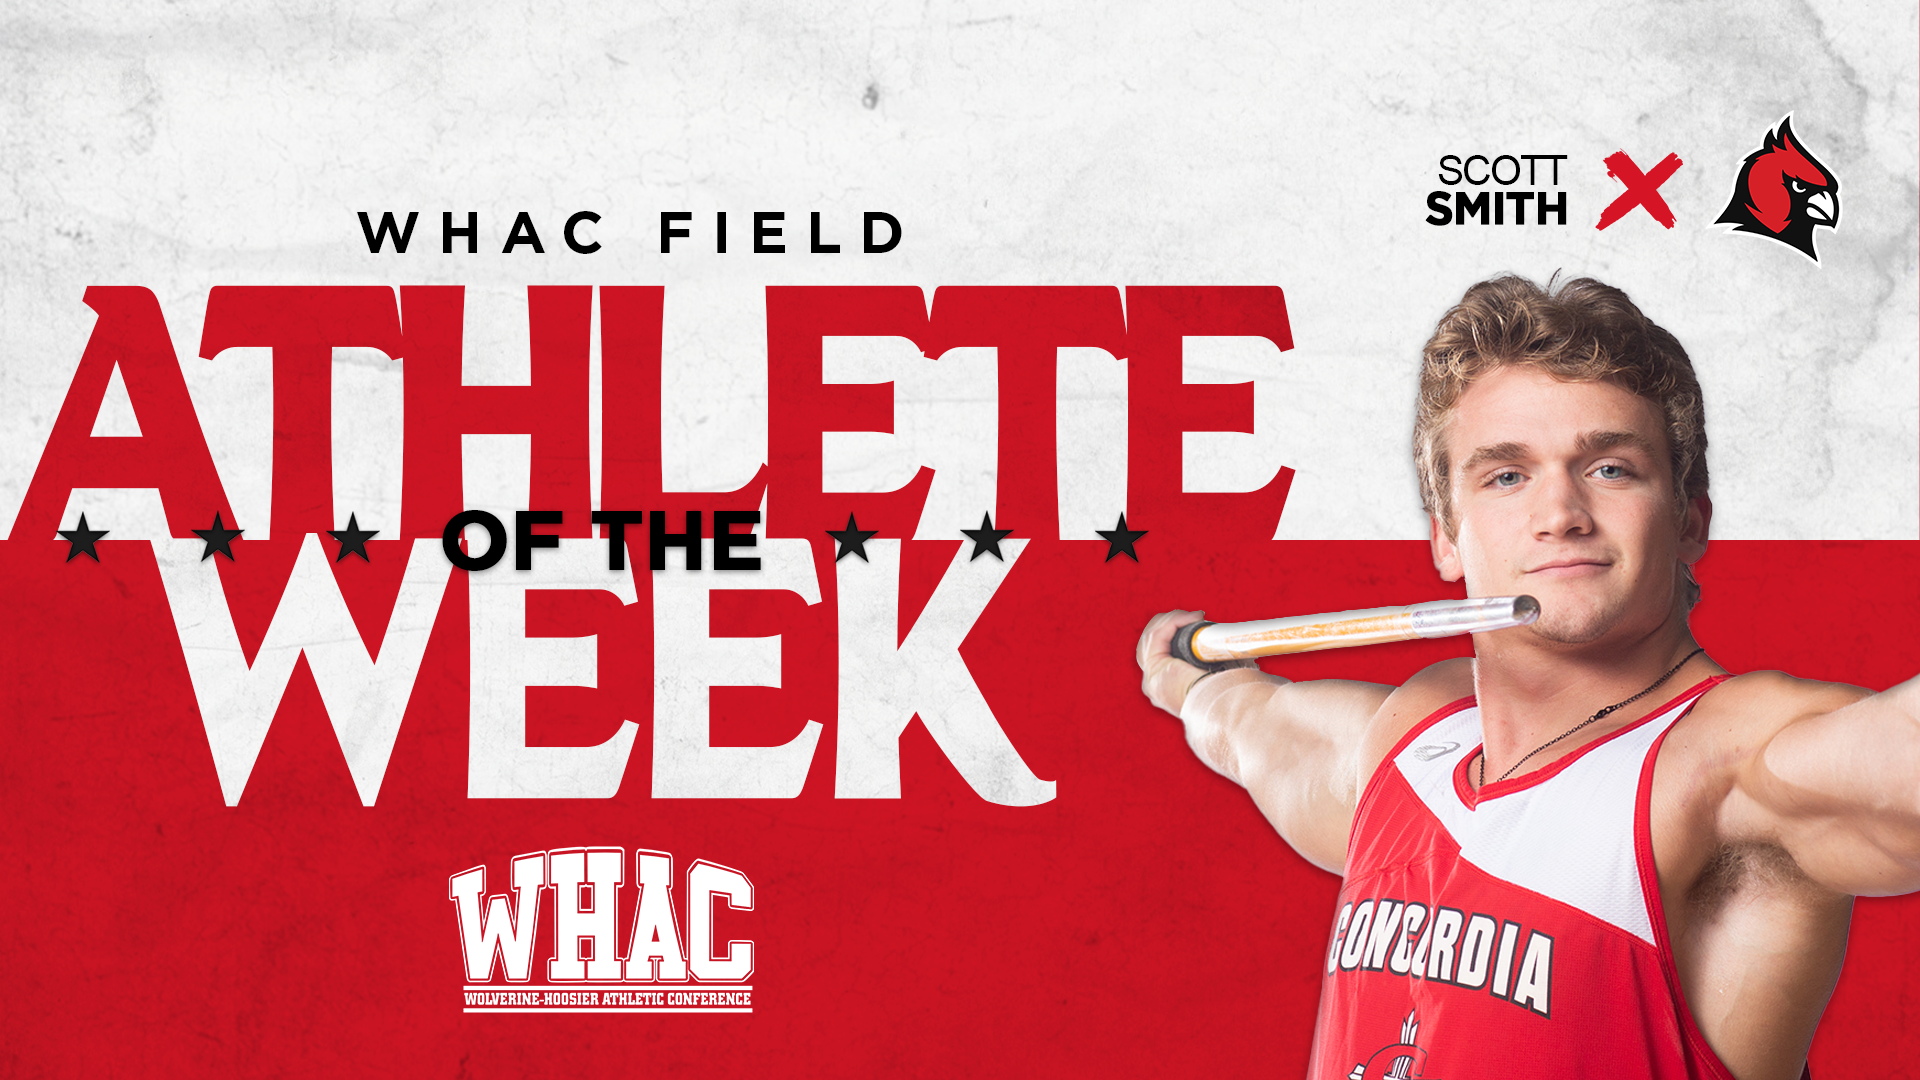 Scott Smith takes home WHAC Field Athlete of The Week